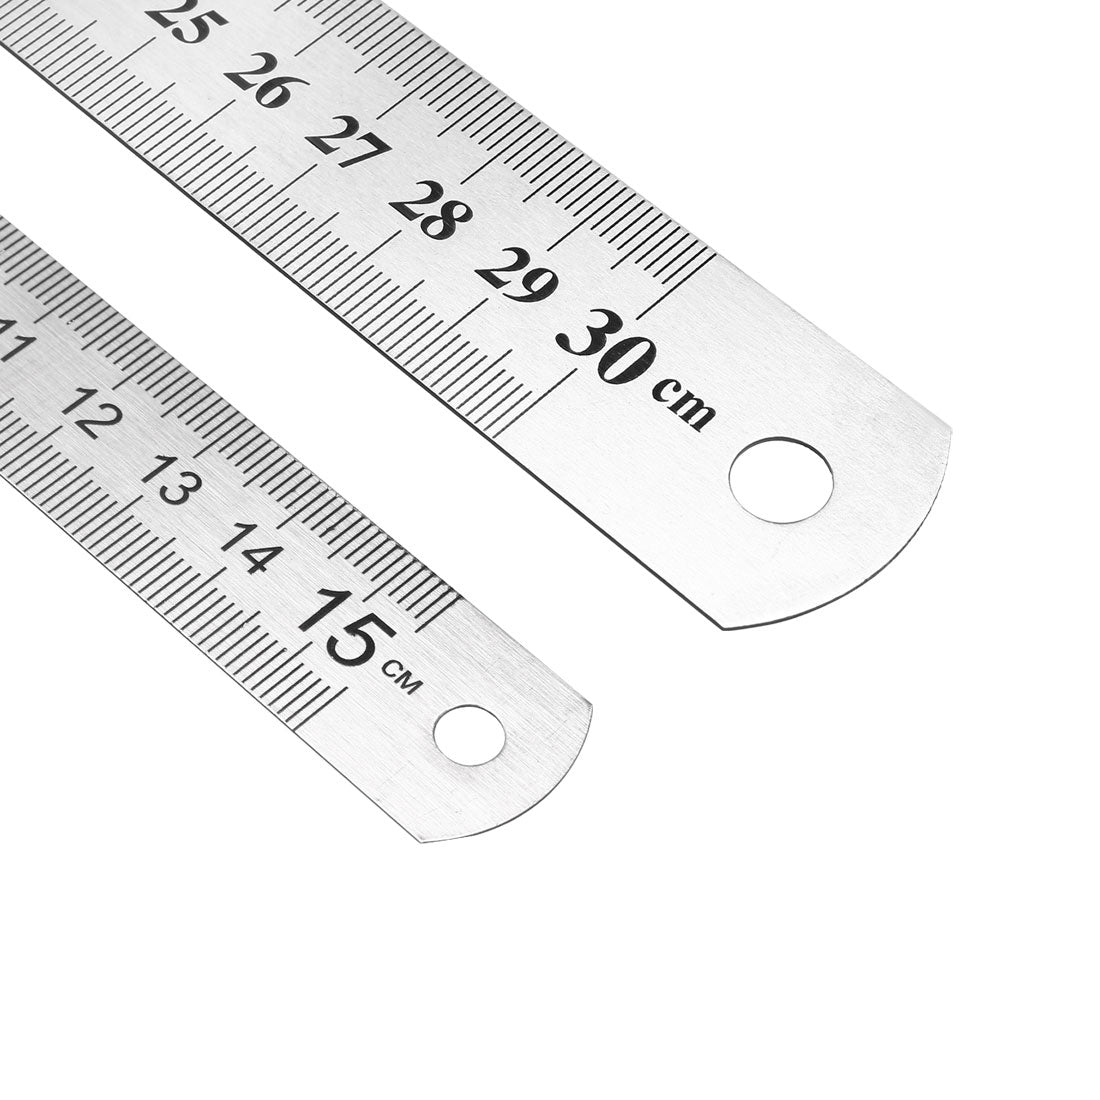 uxcell Uxcell Stainless Steel Rulers set (6,12,inch) Straight Ruler Inches and Metric Scale